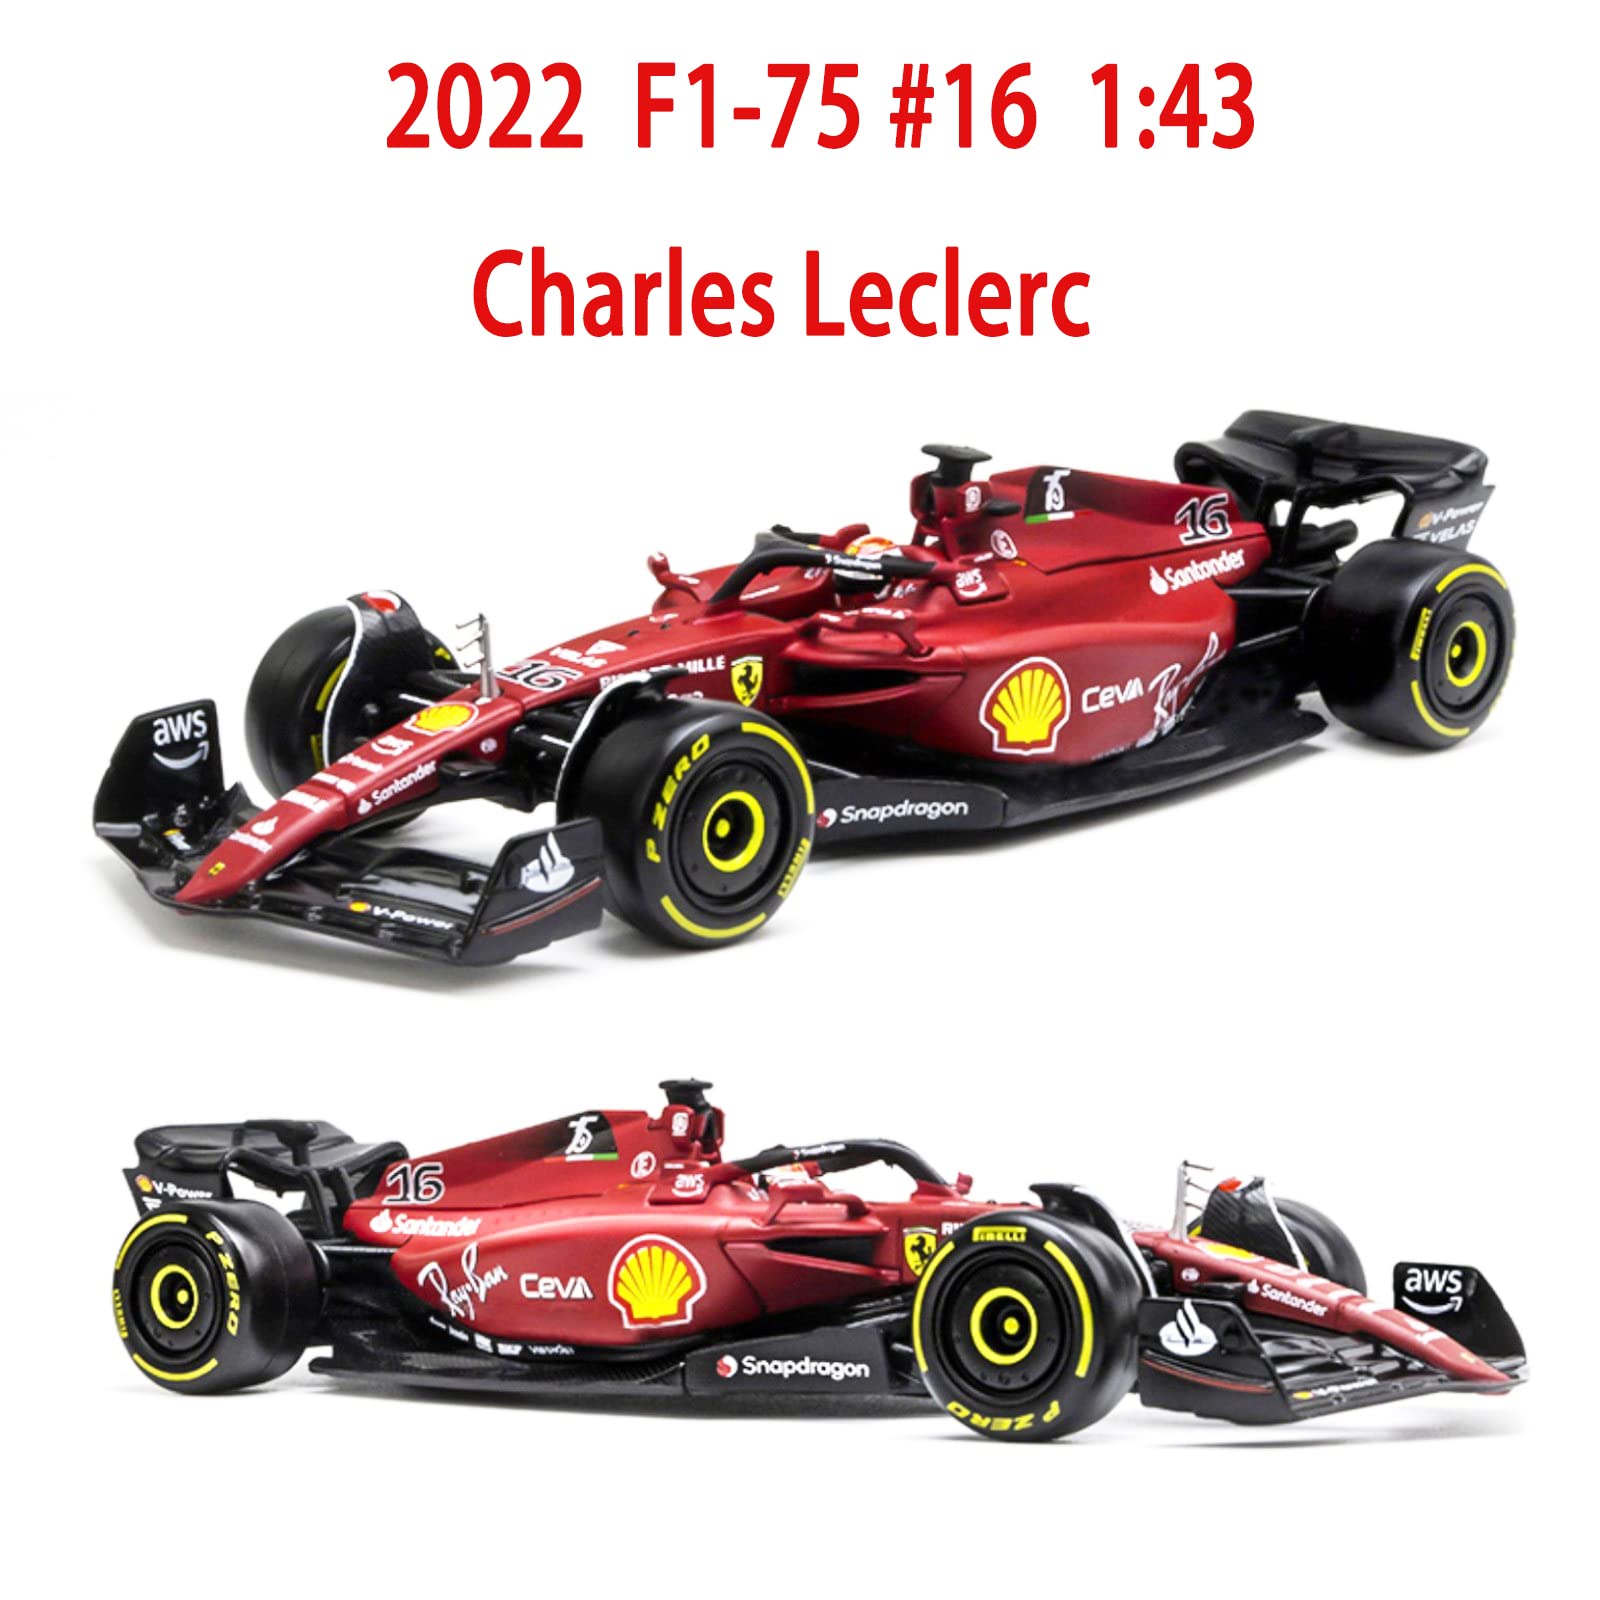 HTLNUZD Bburago 1:43 2022 Latest F1-75 Racing #16 Charles Leclerc 1/43 F1-75#16 Formula One Alloy Super Static Die Cast Vehicles Collectible Car Model Collection Toys Gifts